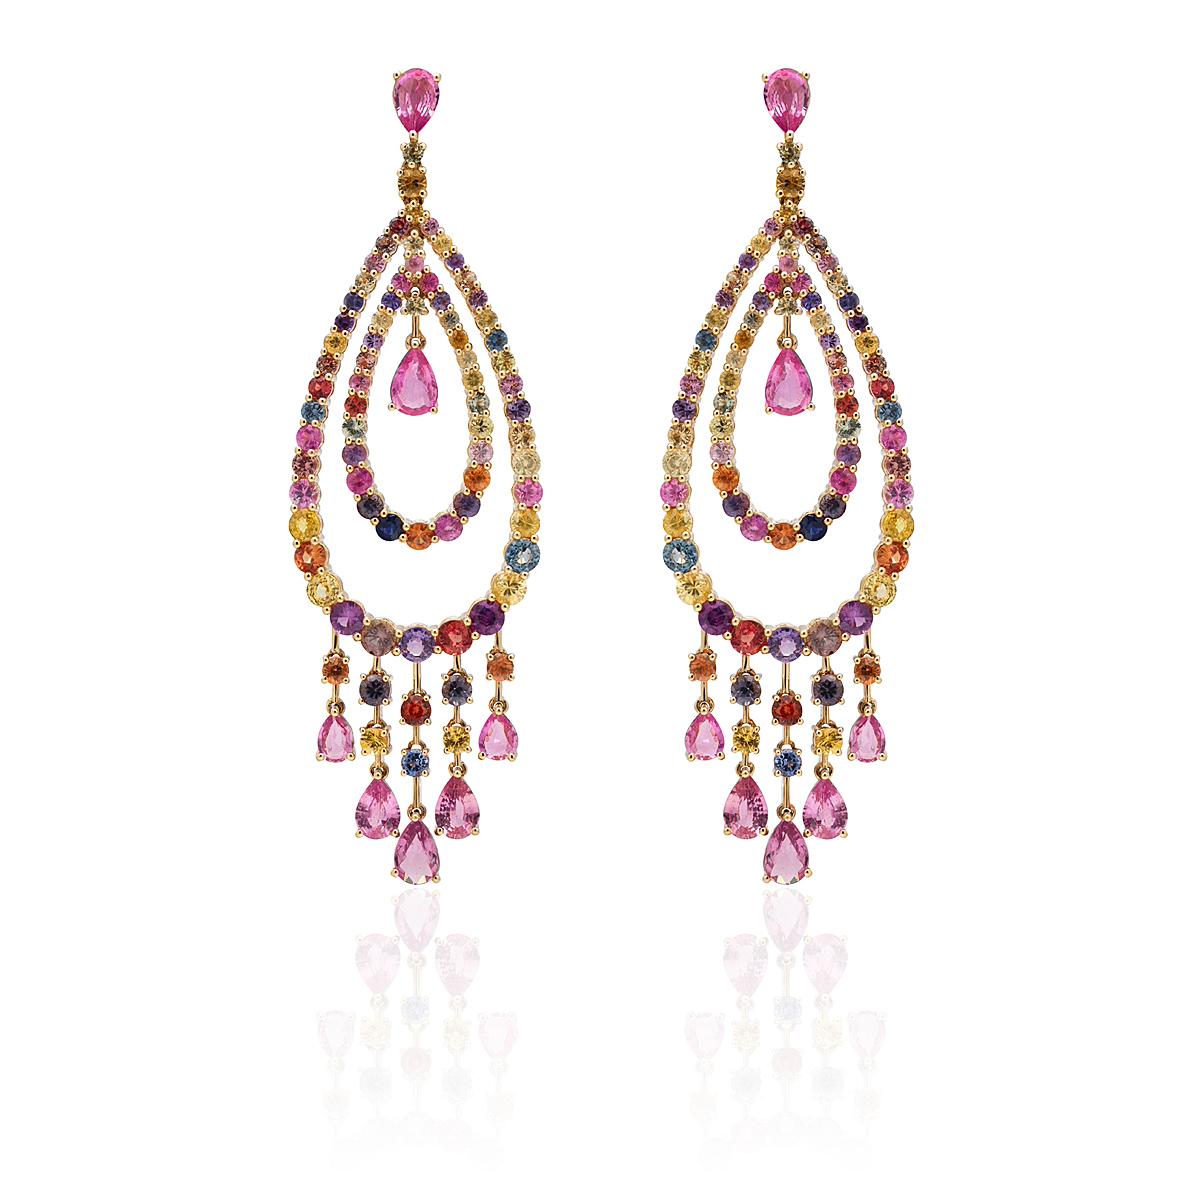 Play of Colors Collection

Multicolor Sapphire chandelier earrings set in 18K yellow gold.

Multicolor Sapphire: 14.798ct total weight.
